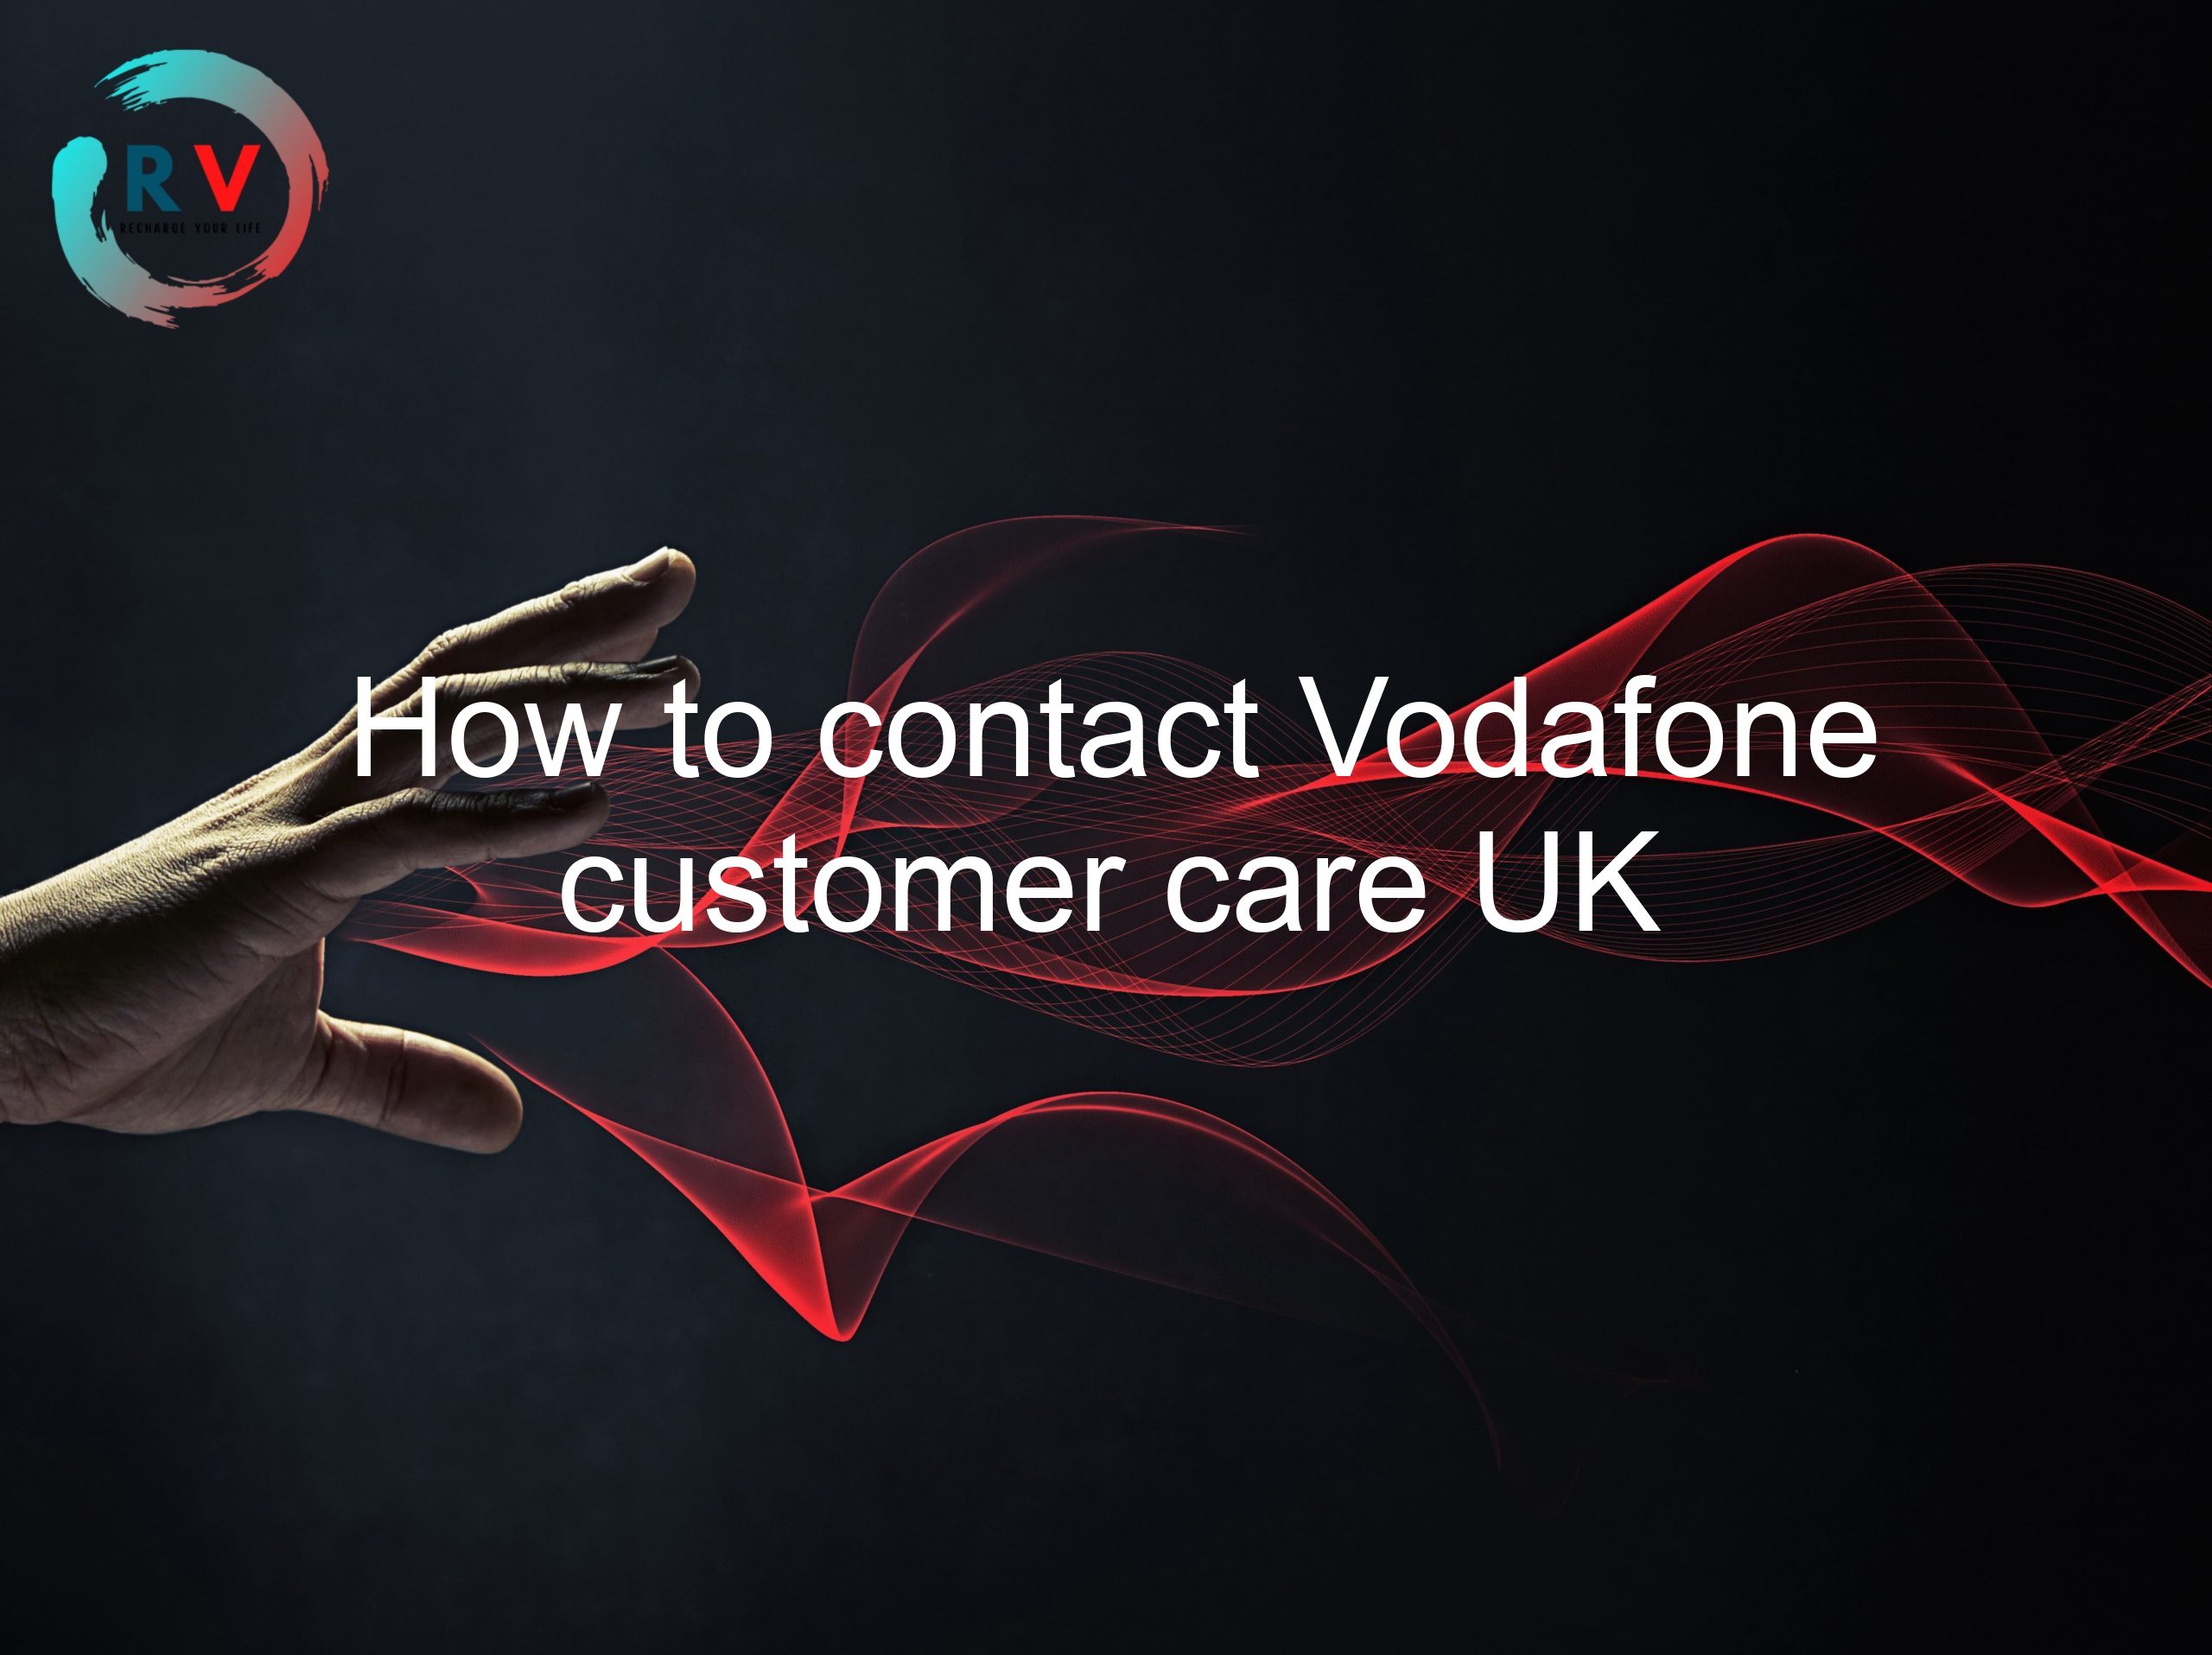 How to contact Vodafone customer care UK